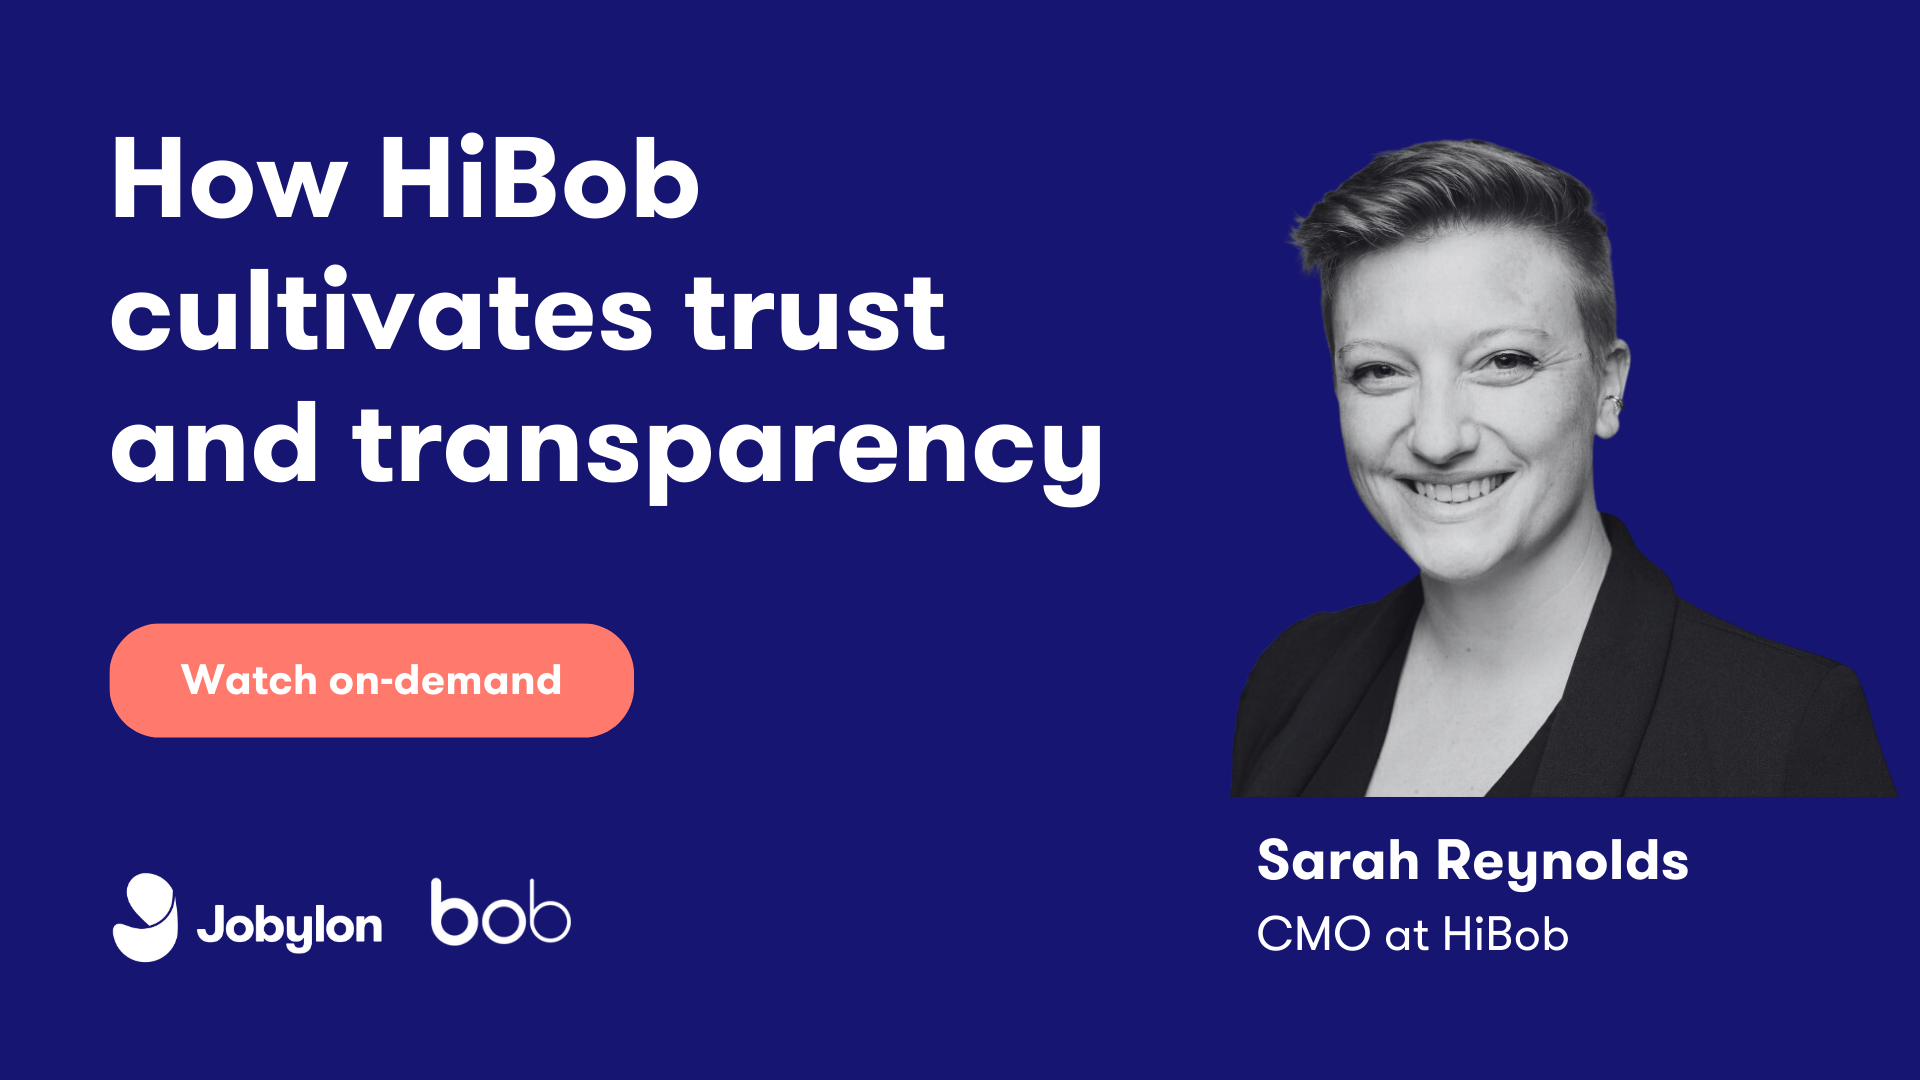 How HiBob cultivates trust and transparency